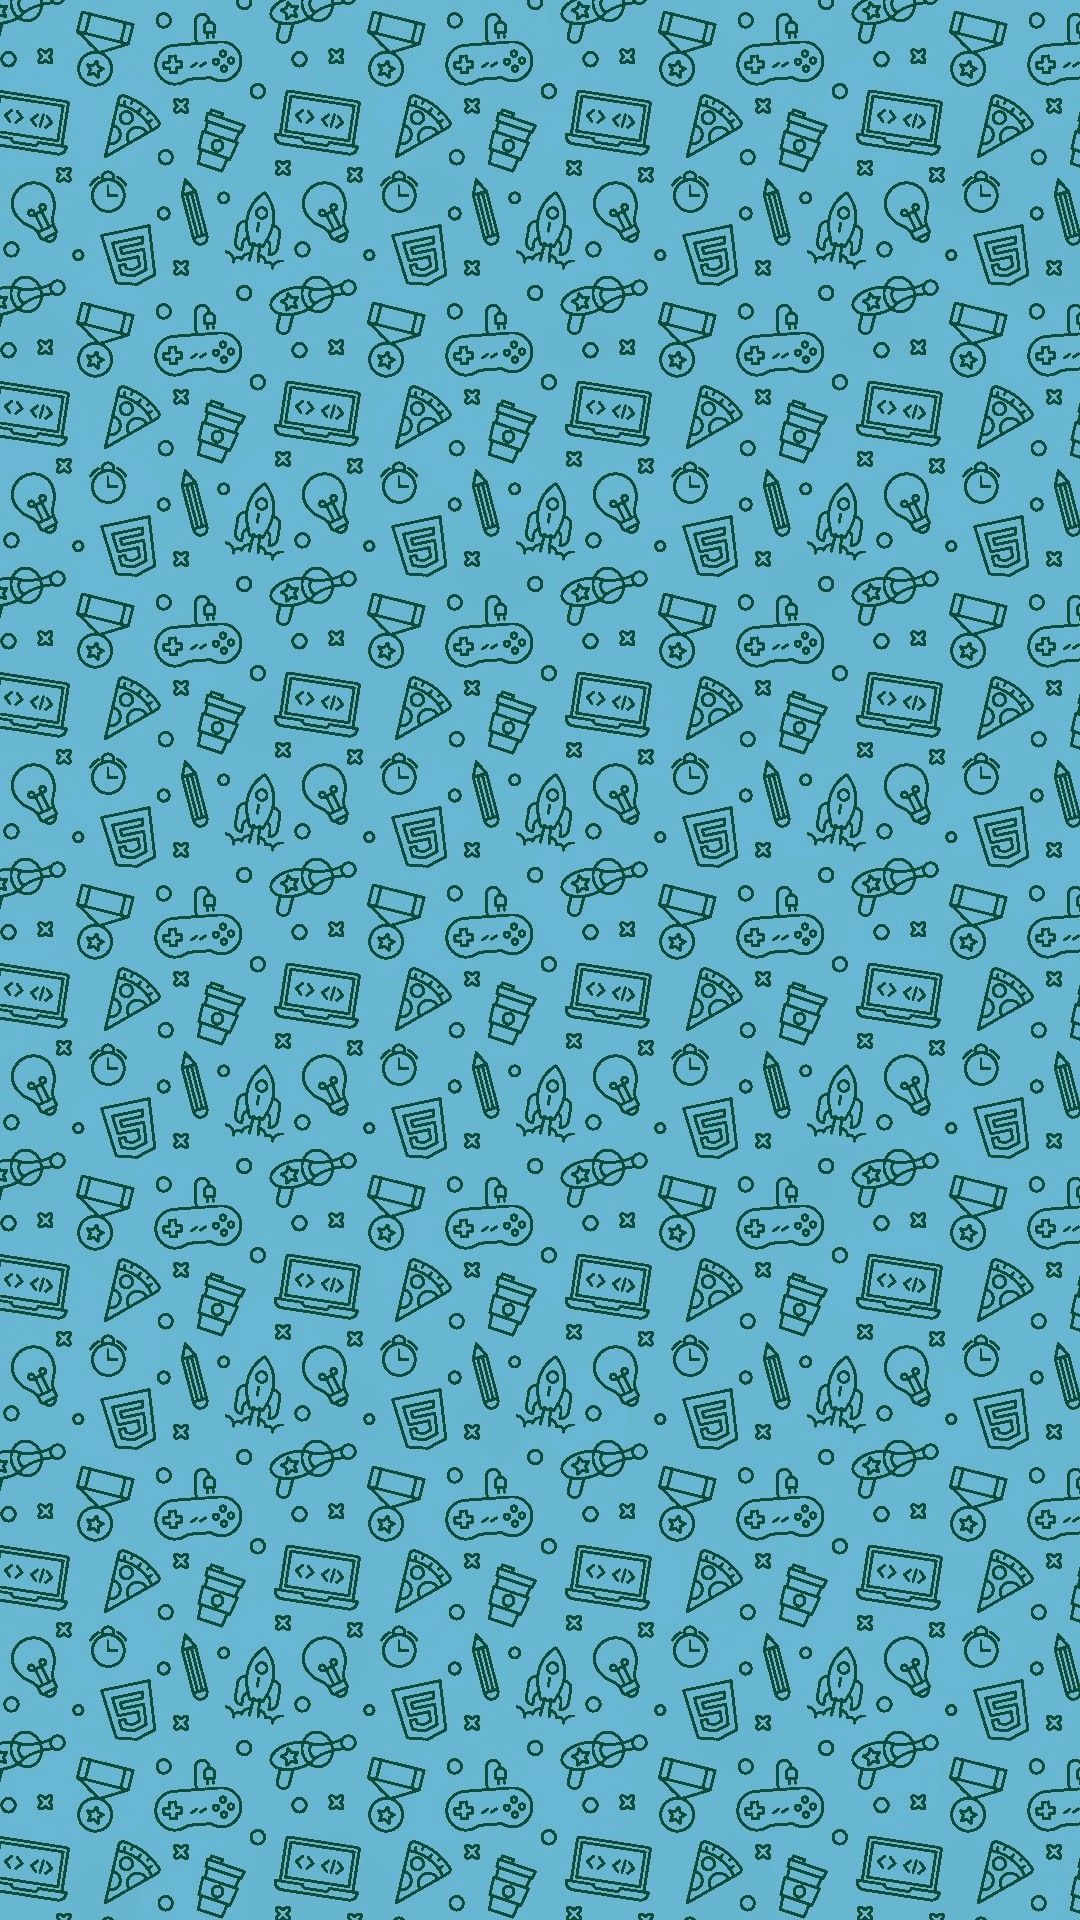 Does anyone has this as an image Its a Telegram chat background Id like  to use it as a wallpaper and also for Whatsapp  rphonewallpapers